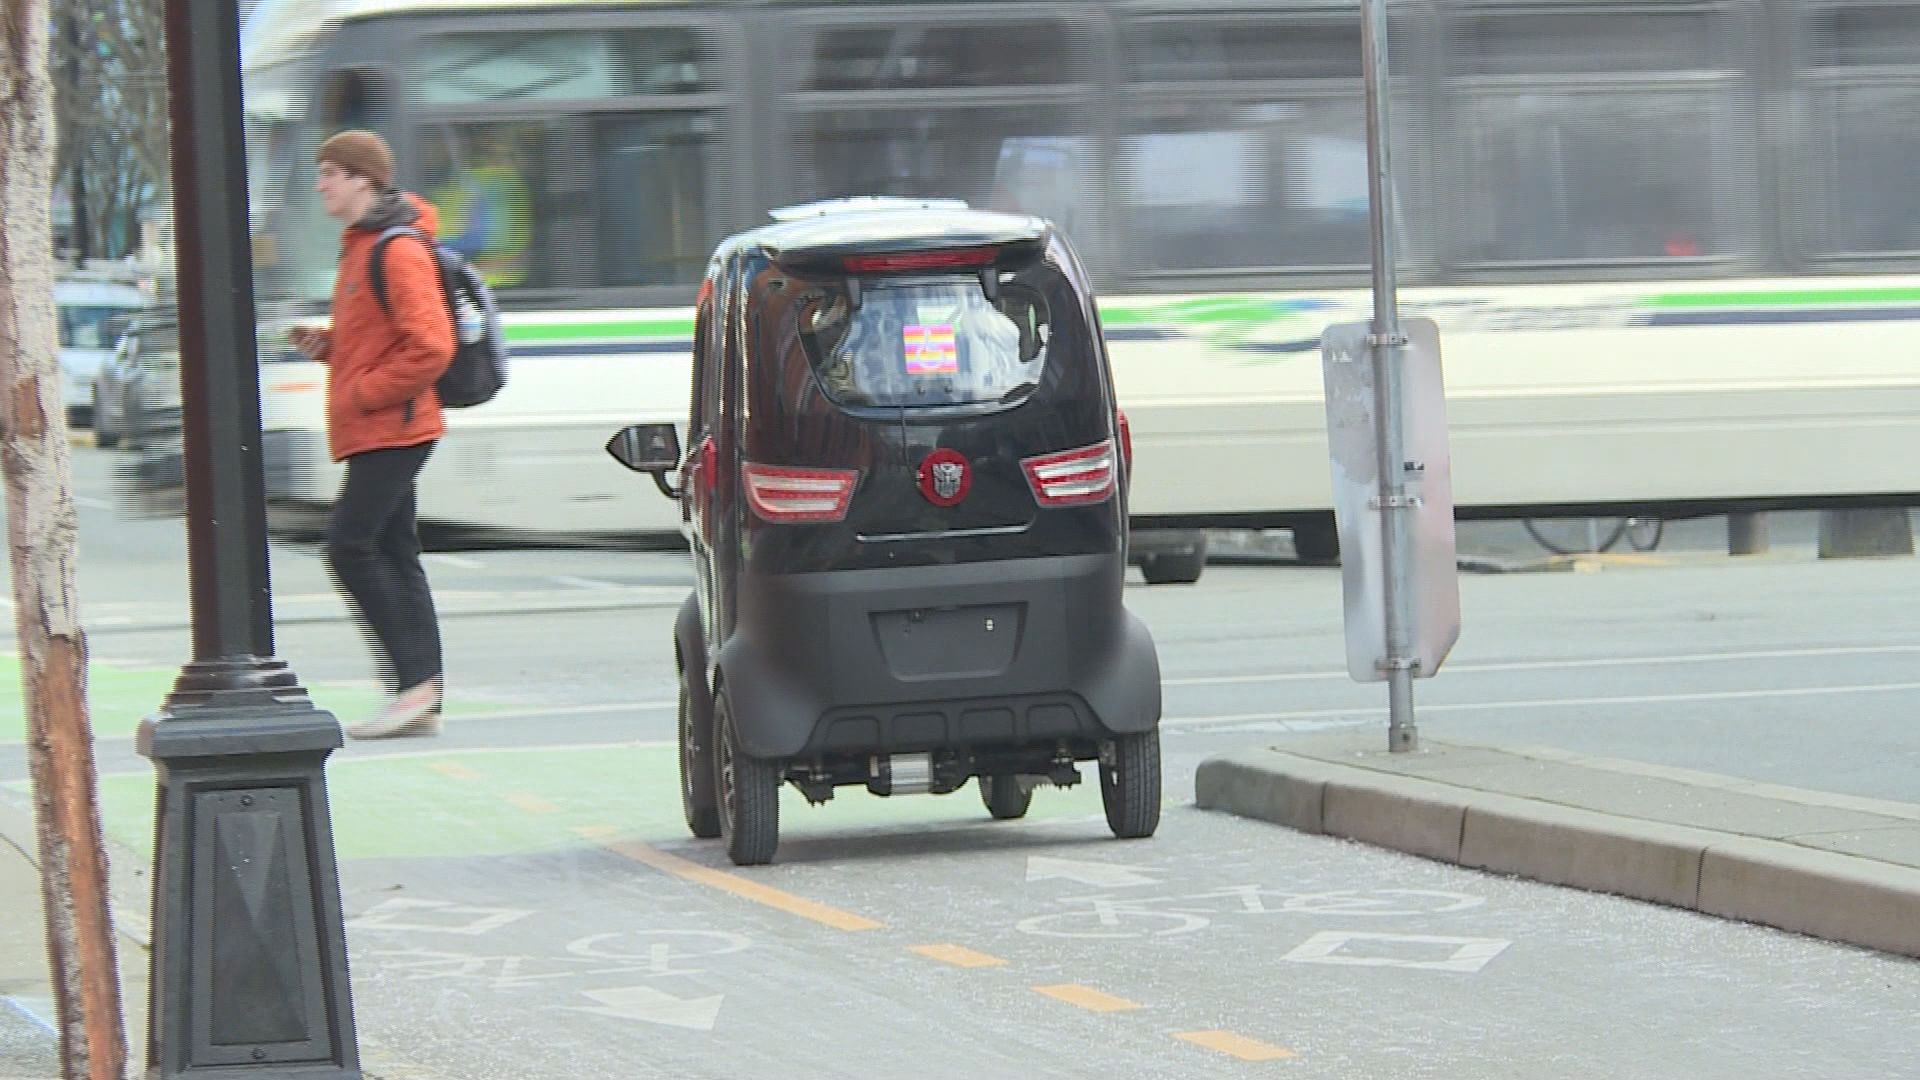 Advocates call for changes to allow mobility scooters in B.C. bike lanes